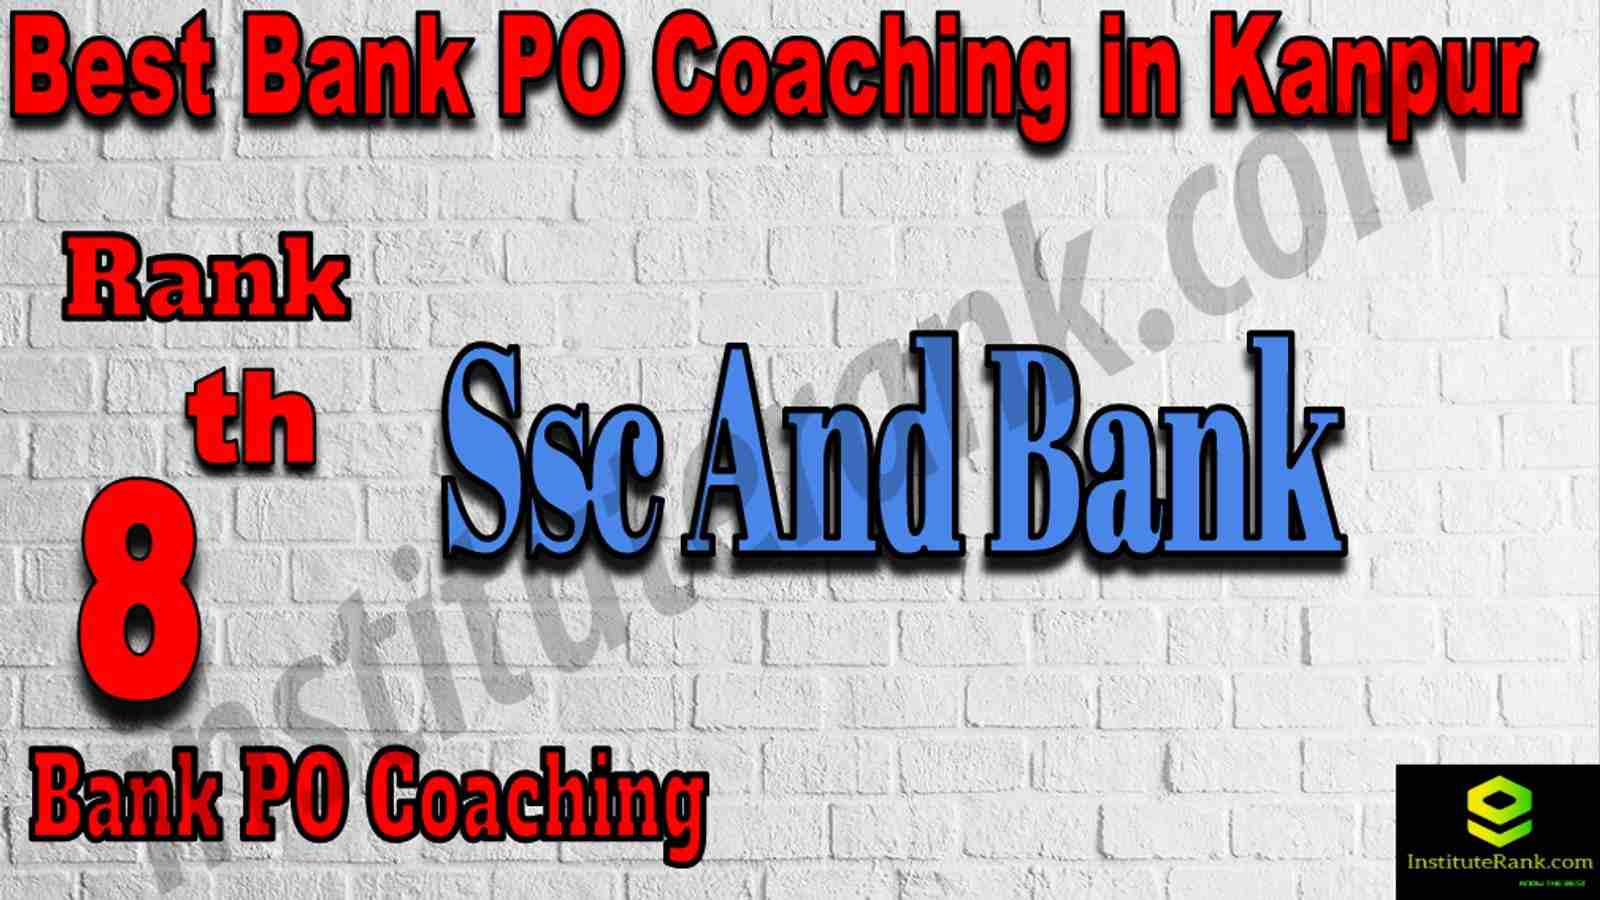 8th Best Bank PO Coaching in Kanpur